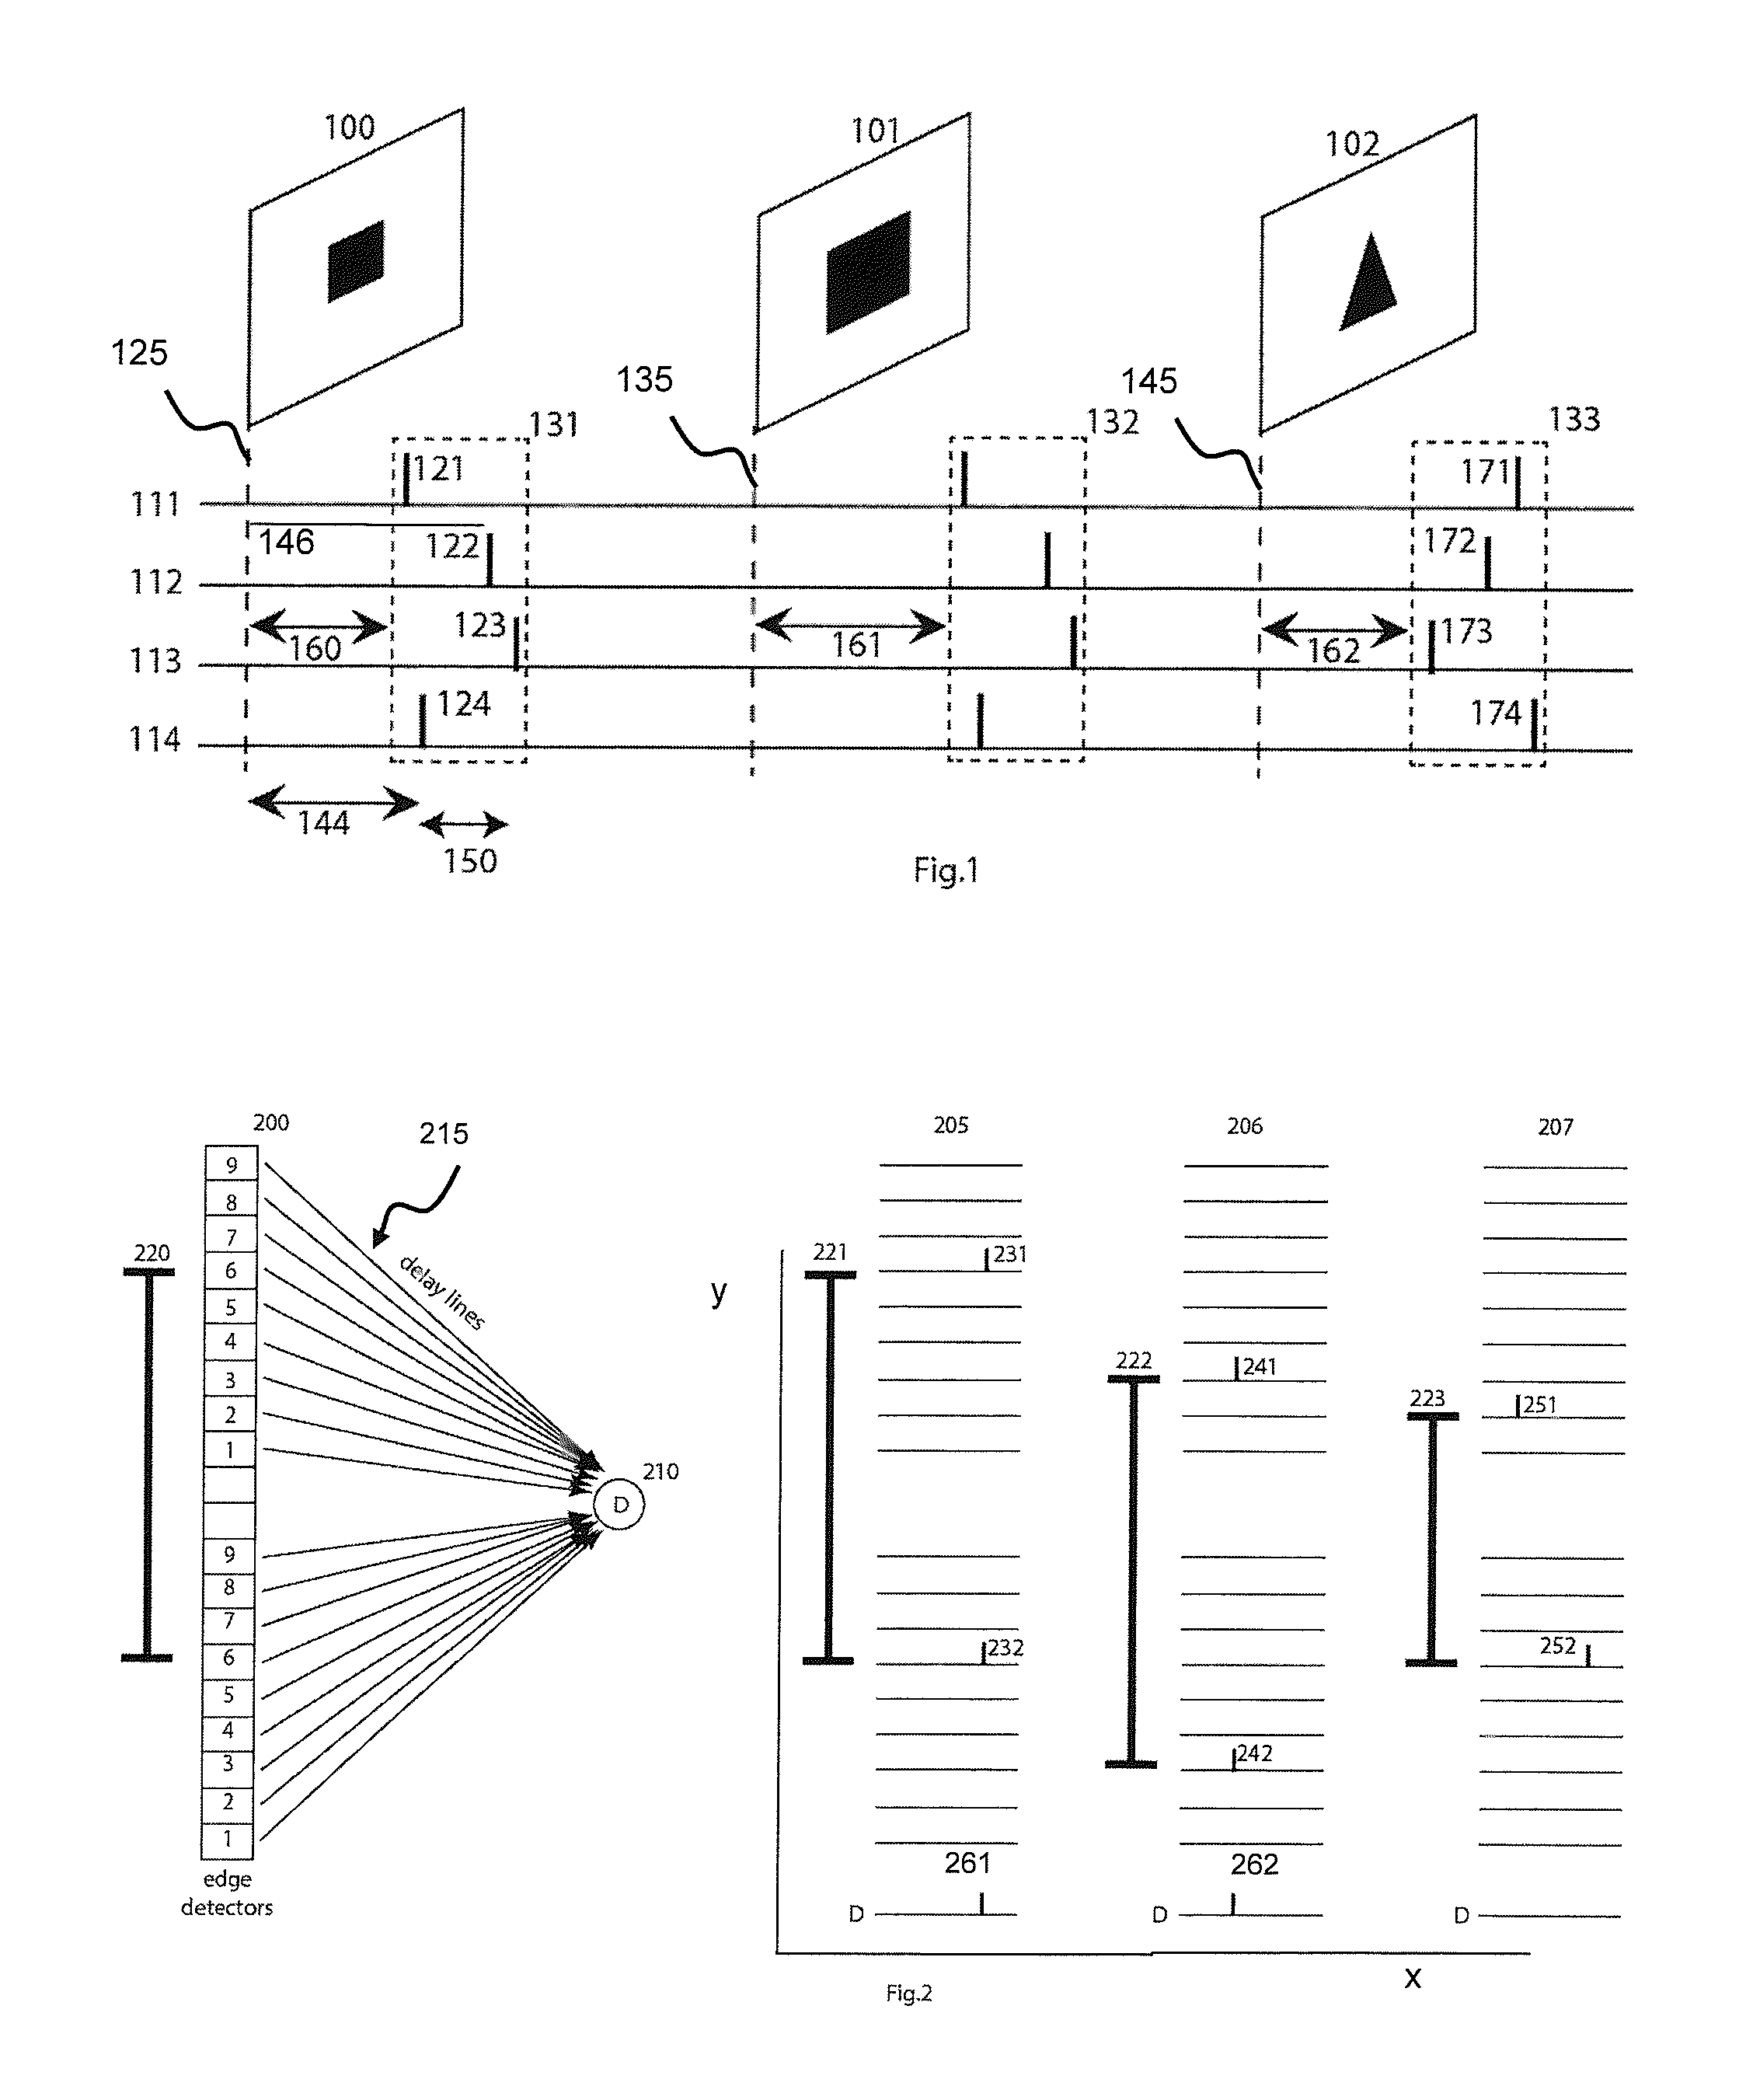 Apparatus and methods for pulse-code invariant object recognition